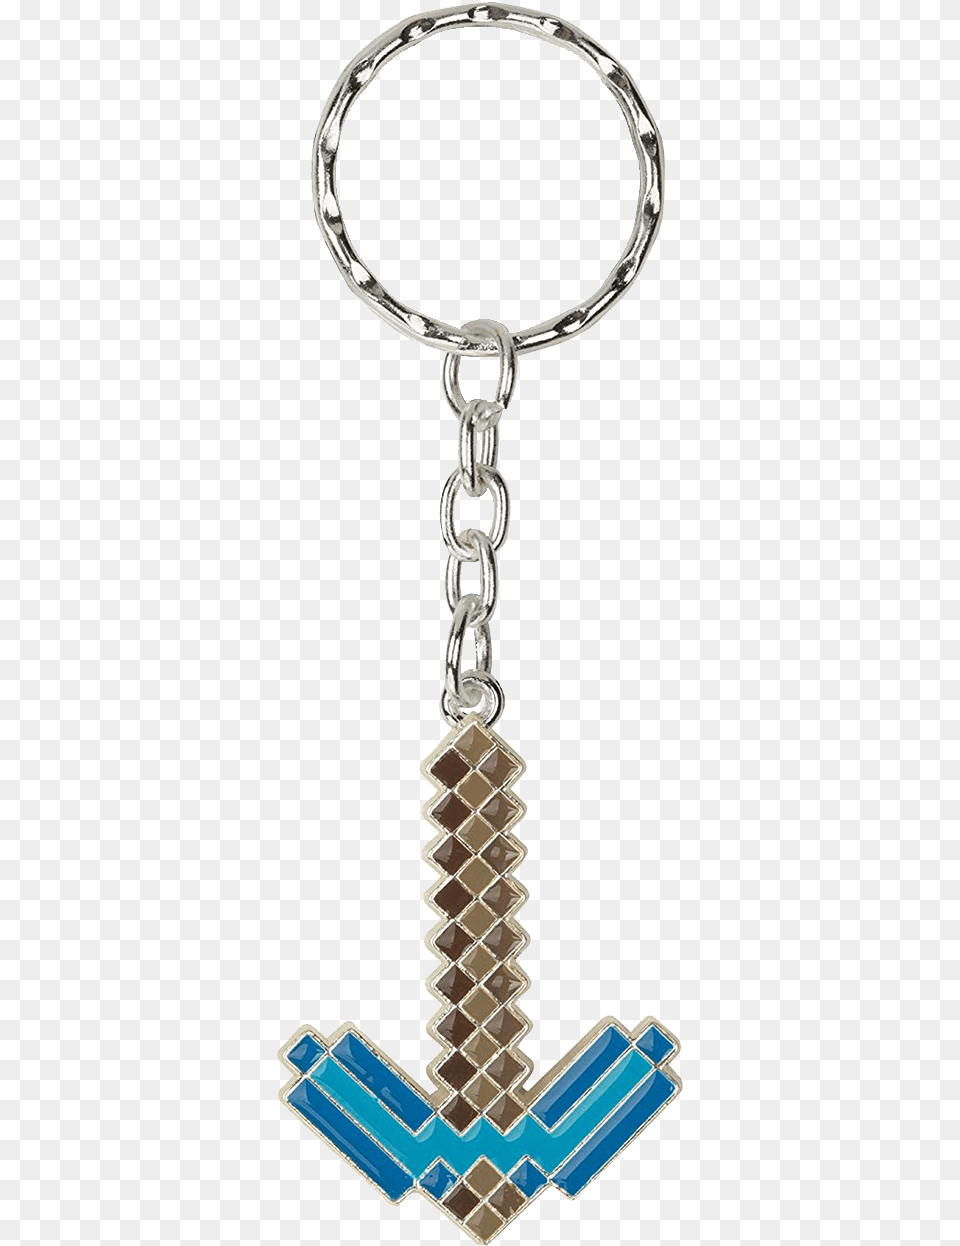 Diamond Pickaxe Keychain, Accessories, Earring, Jewelry, Necklace Png